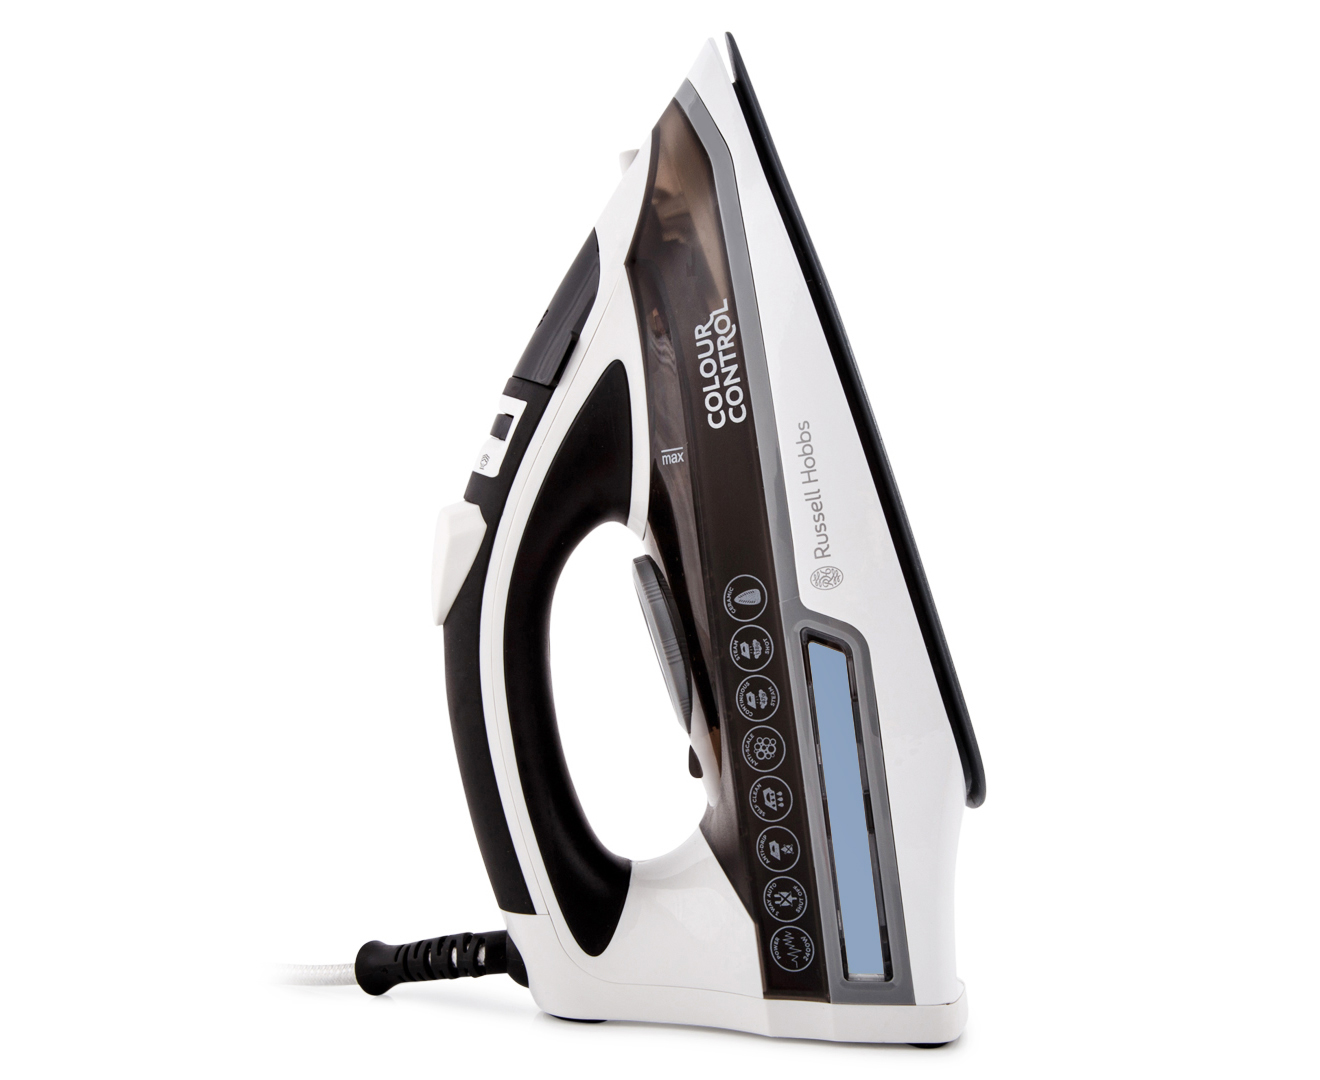 Russell Hobbs 2400W Colour Control Iron